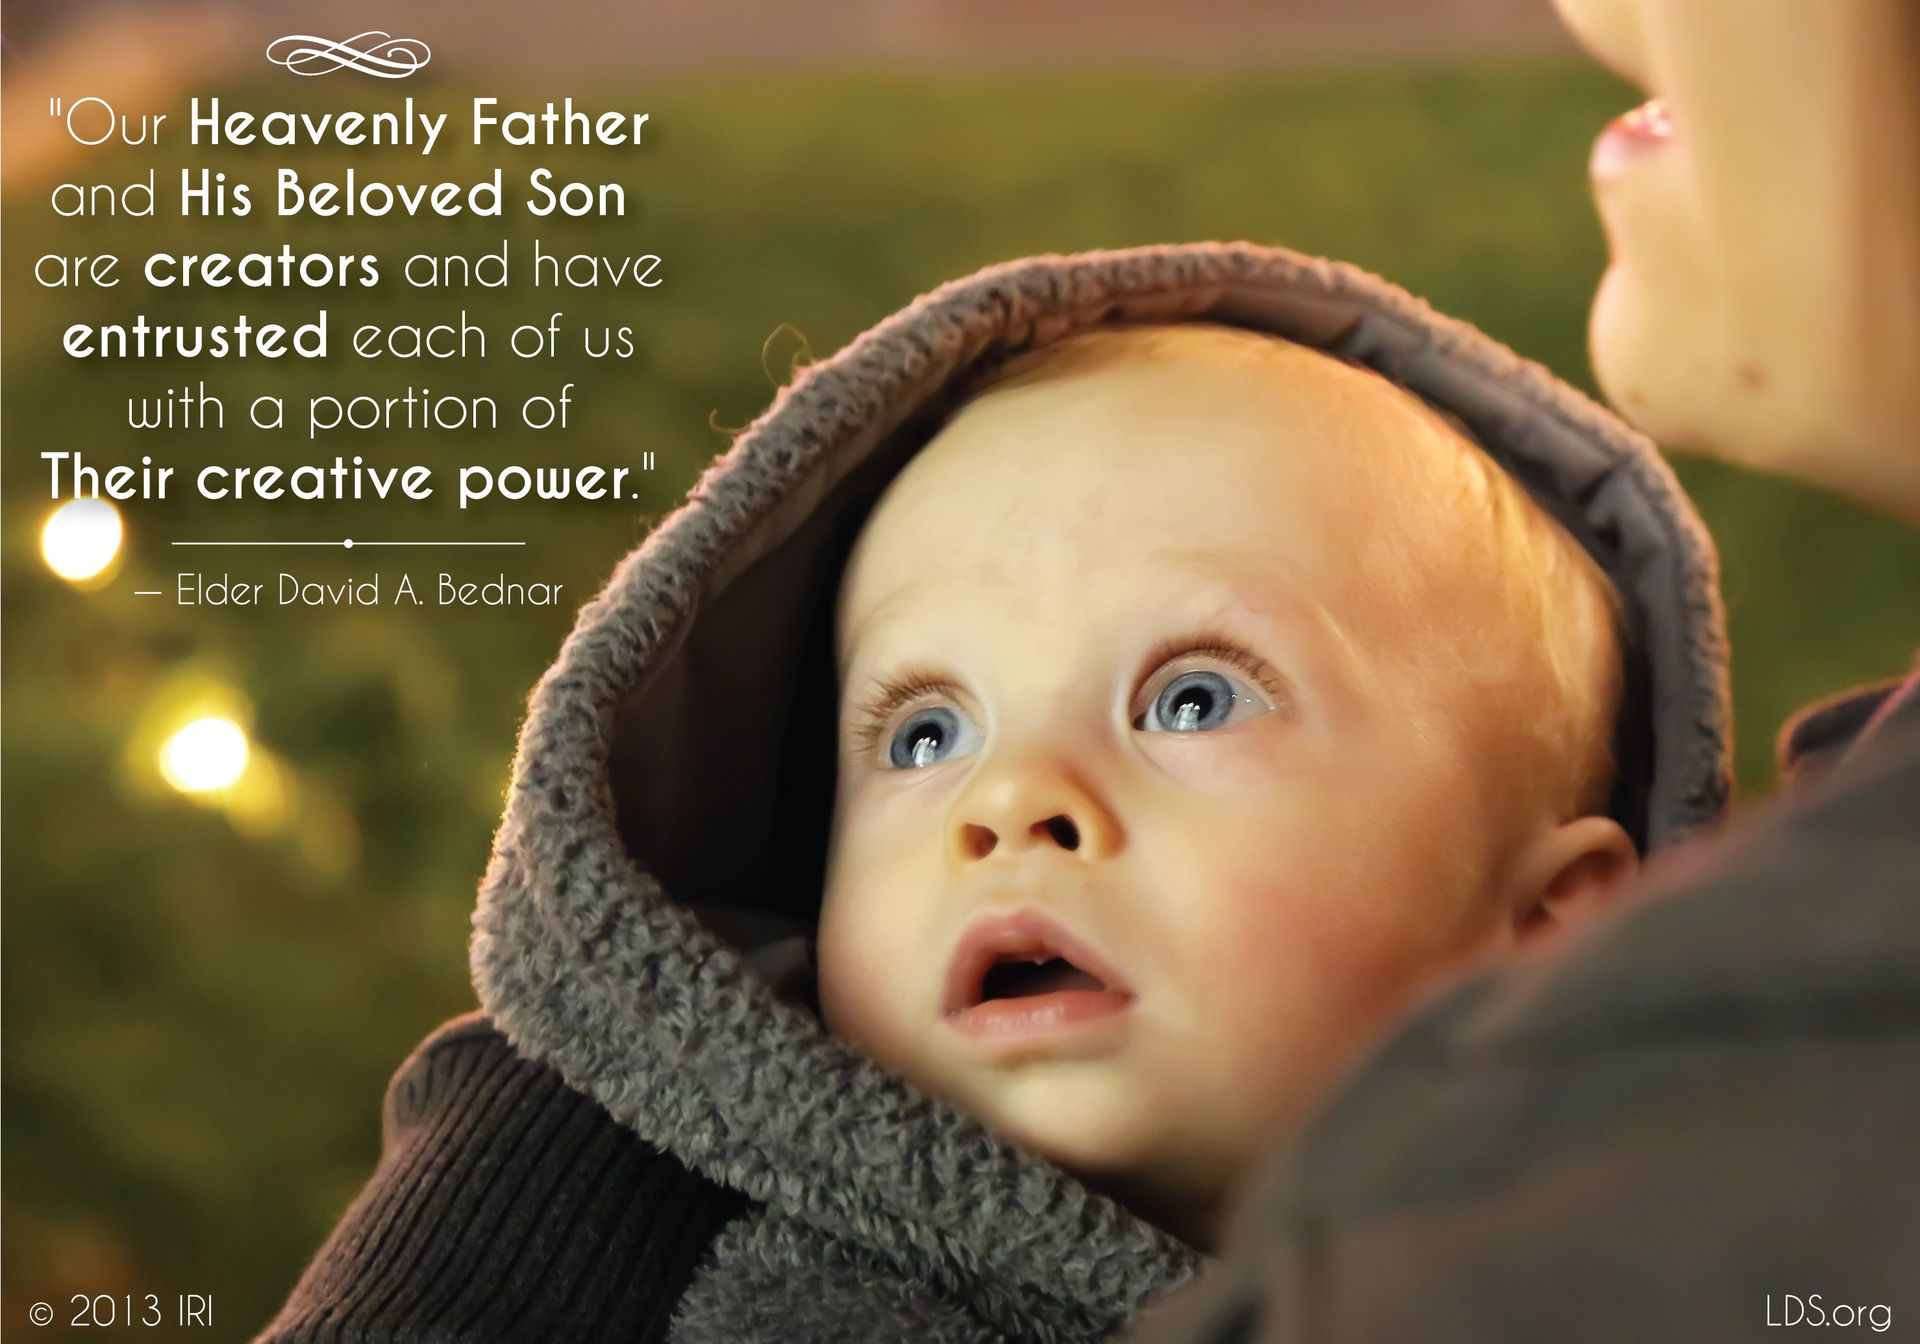 “Our Heavenly Father and His Beloved Son are creators and have entrusted each of us with a portion of Their creative power.”—Elder David A. Bednar, “We Believe in Being Chaste” © undefined ipCode 1.